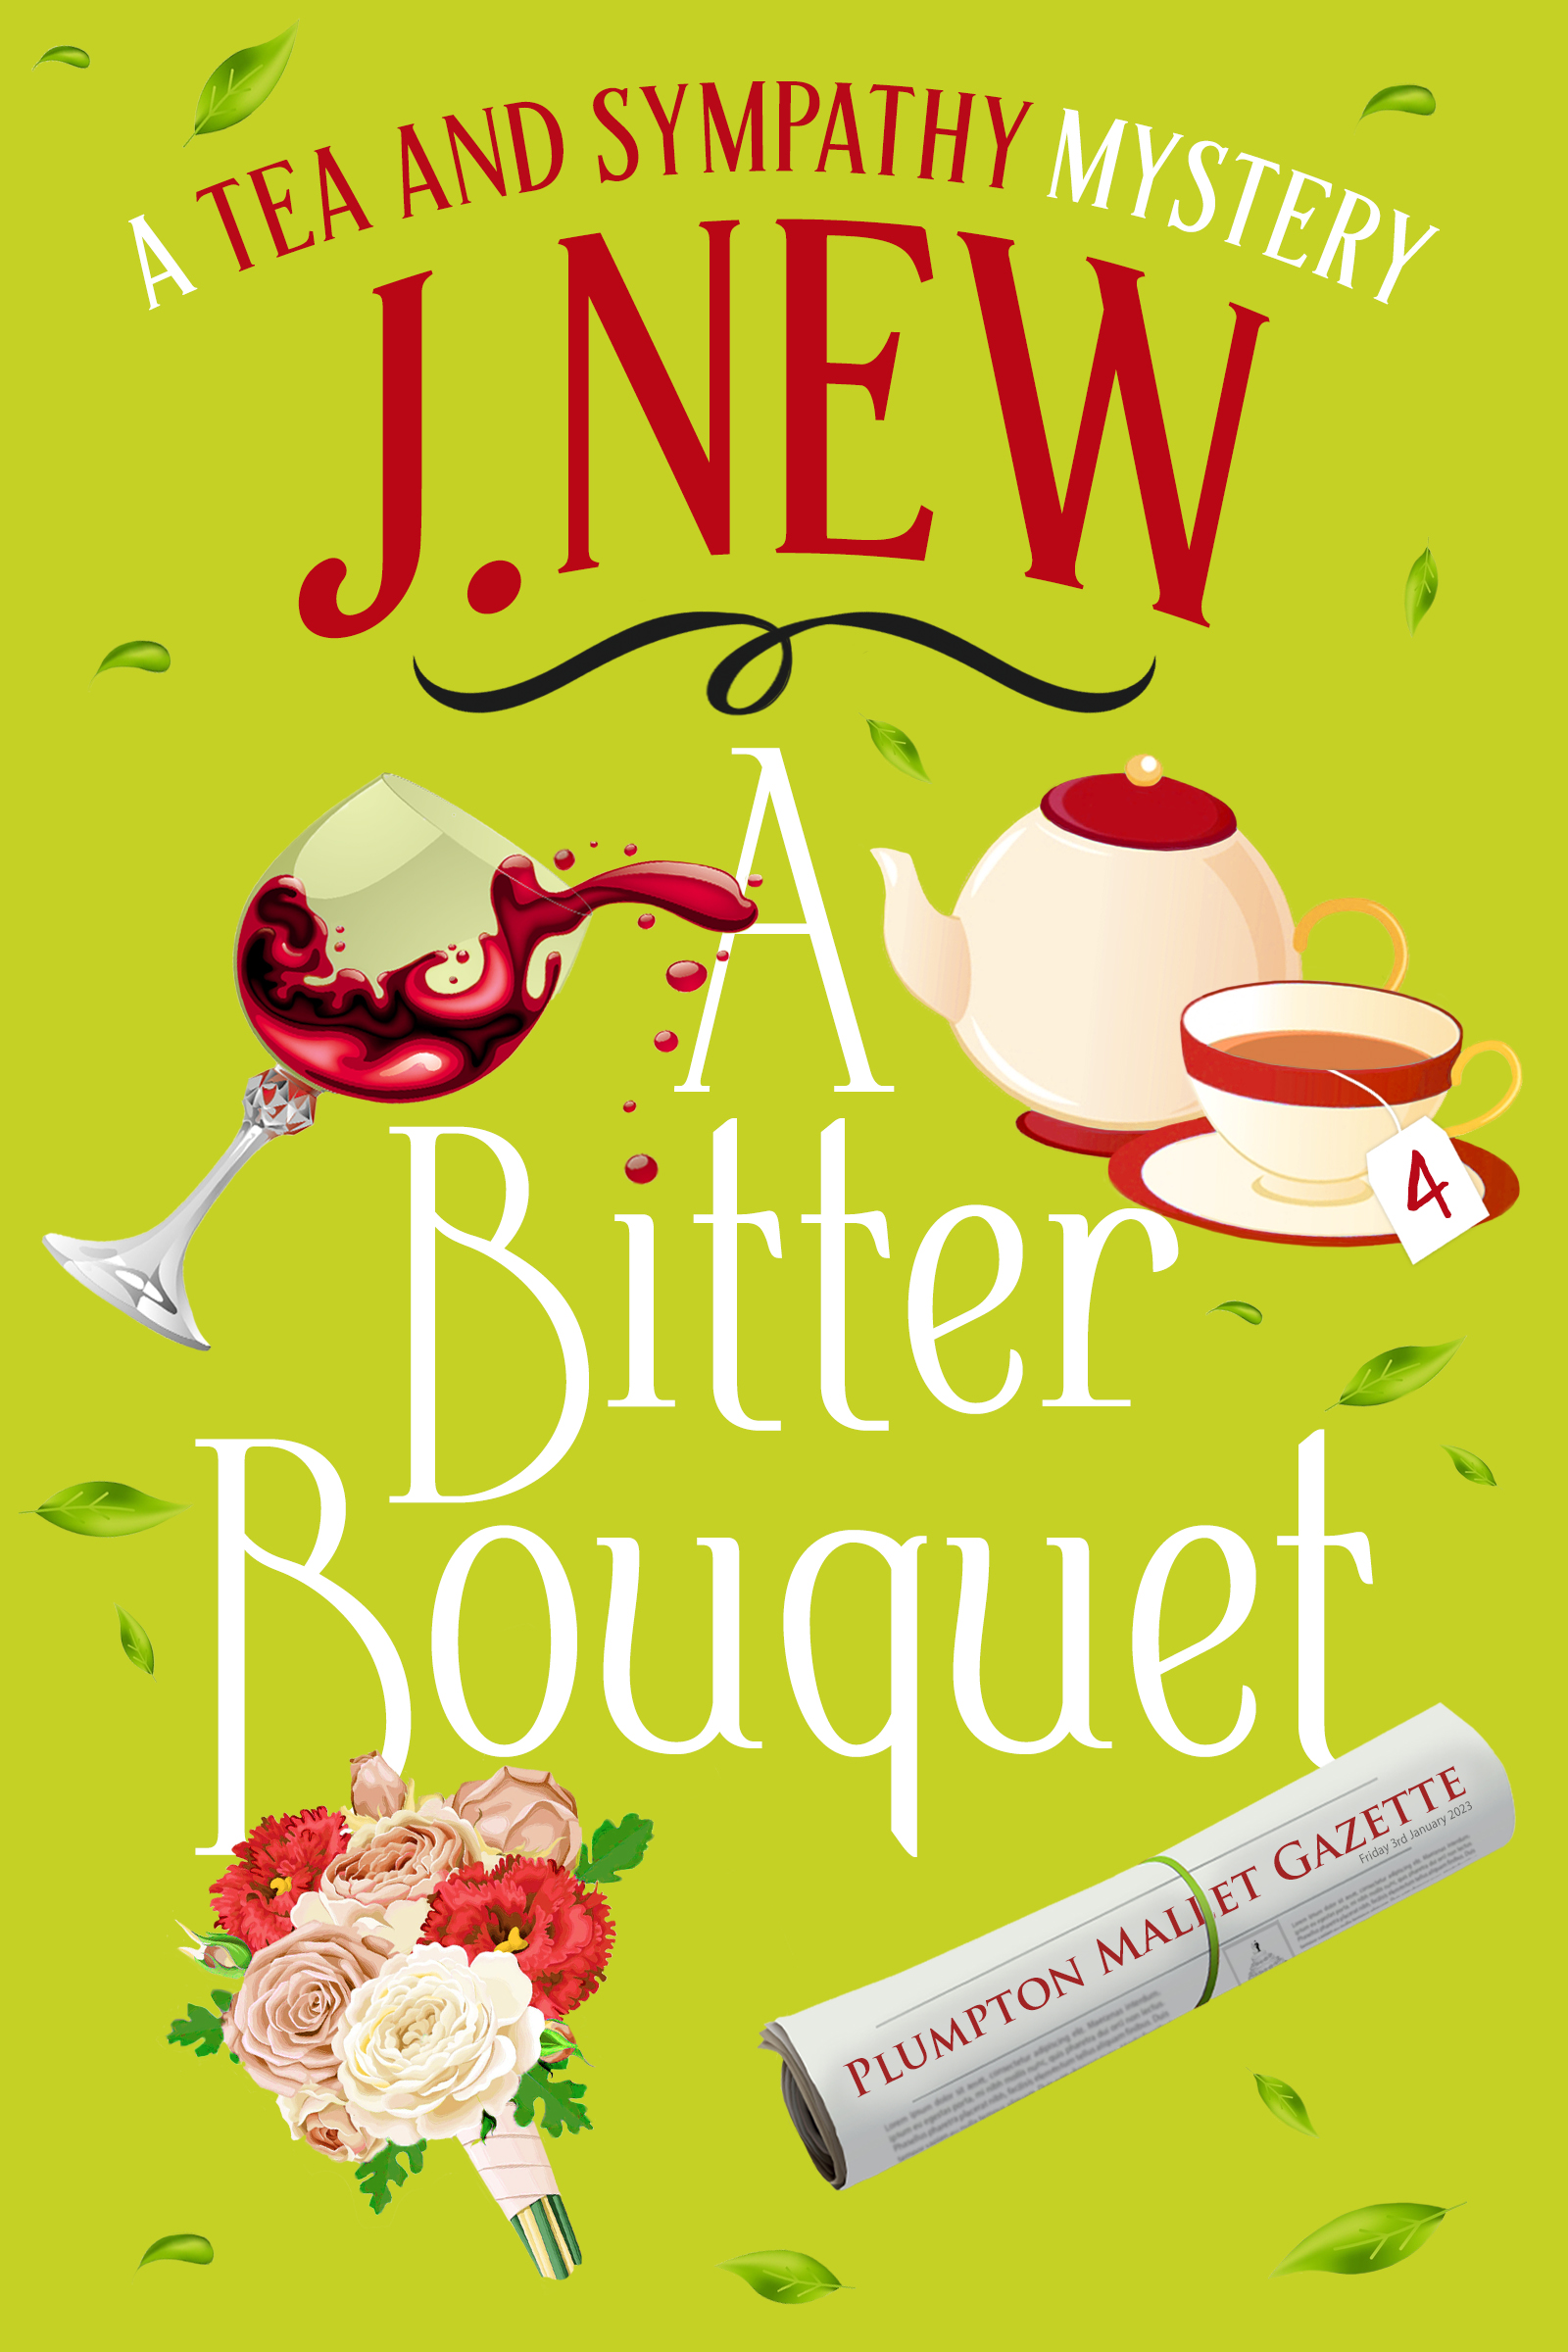 A Bitter Bouquet is the popular fourth book in the British cozy culinary mystery series by author J. New